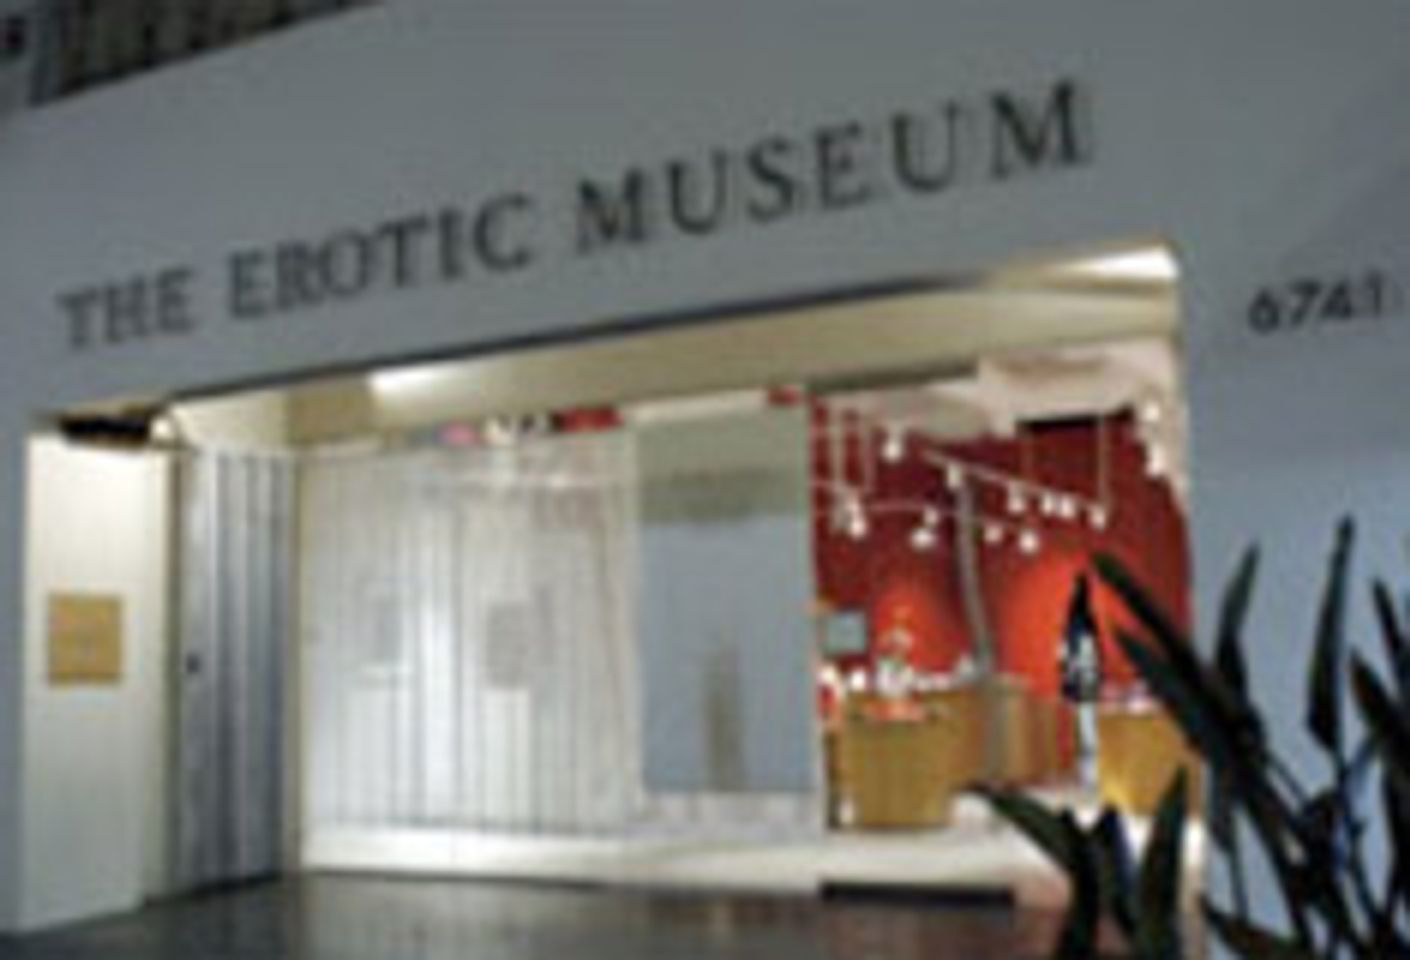 Erotic Museum to Close For Good